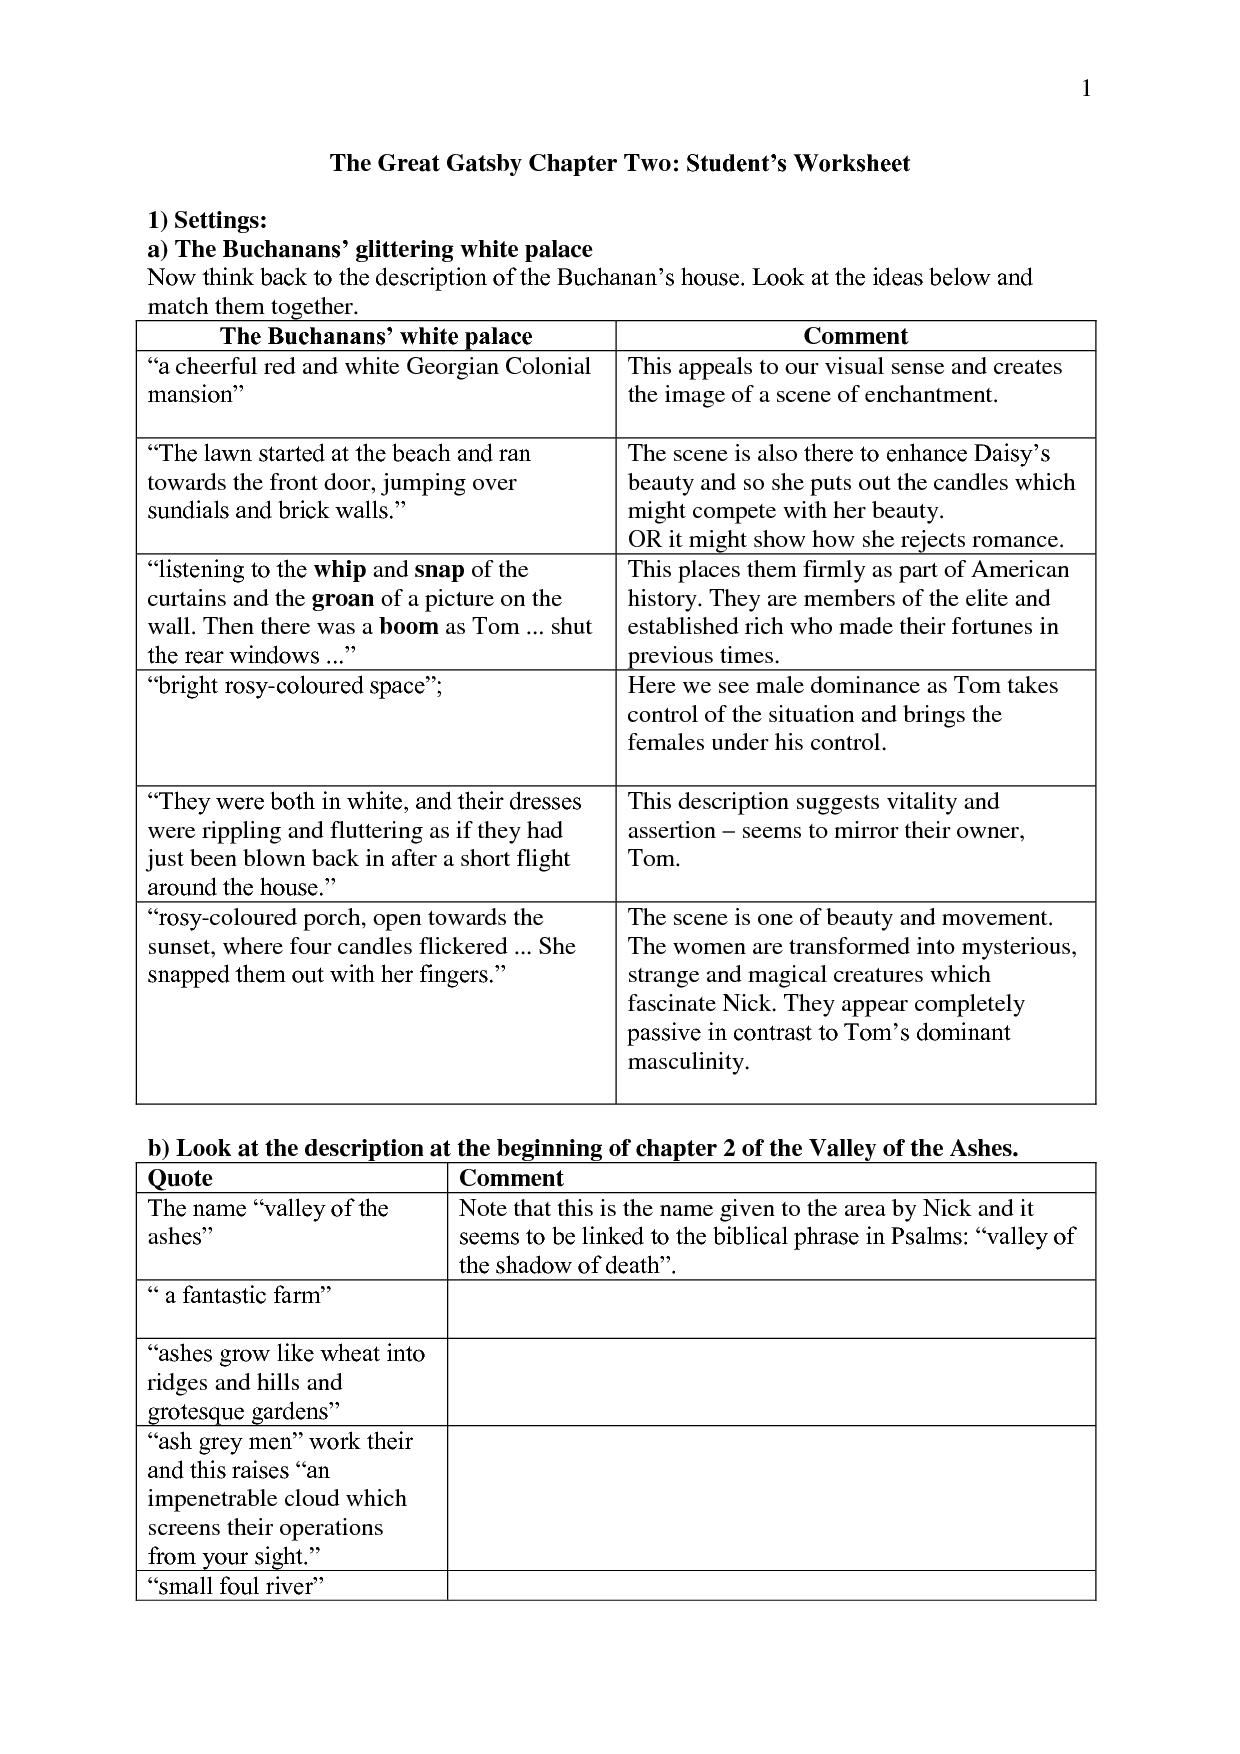 Worksheets For Great Gatsby The Great Gatsby Chapter Two Student s 